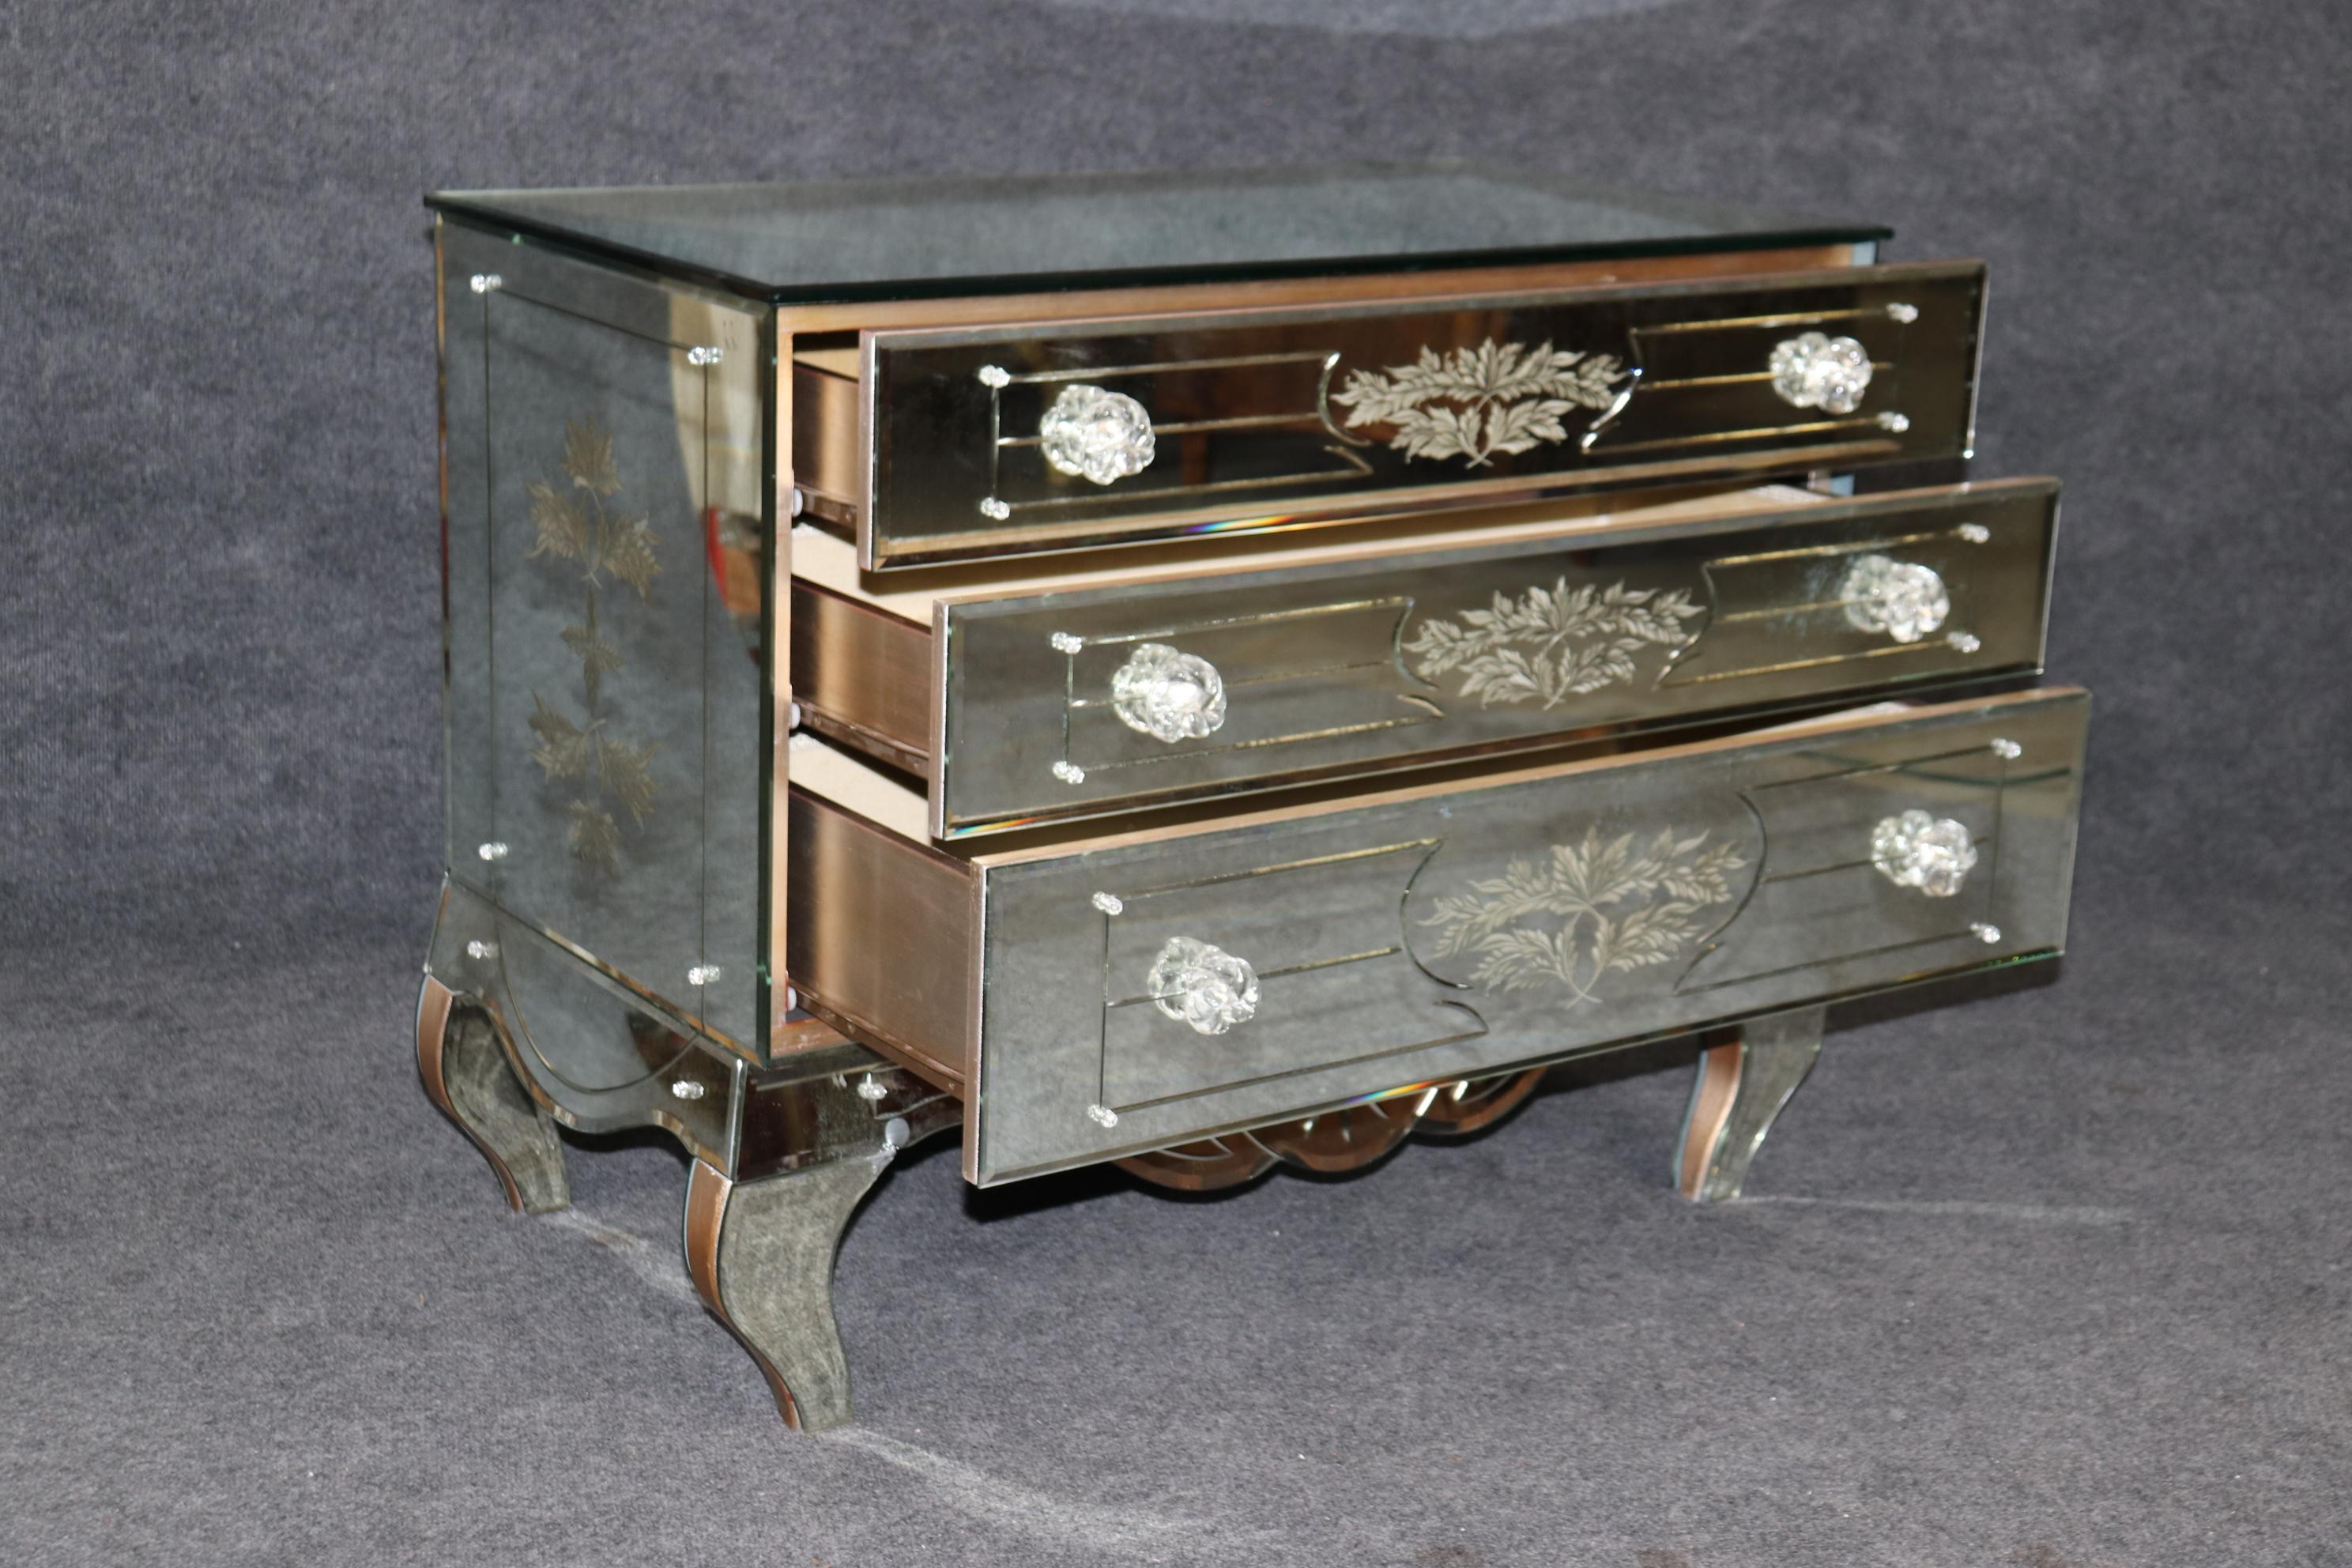 This is a fine and very glamorous pair of Louis XV style Italian -made Murano style small commodes or nightstands. This piece is in good condition with minor signs of age including patina to the glass silvering and a small nick or chip here or there